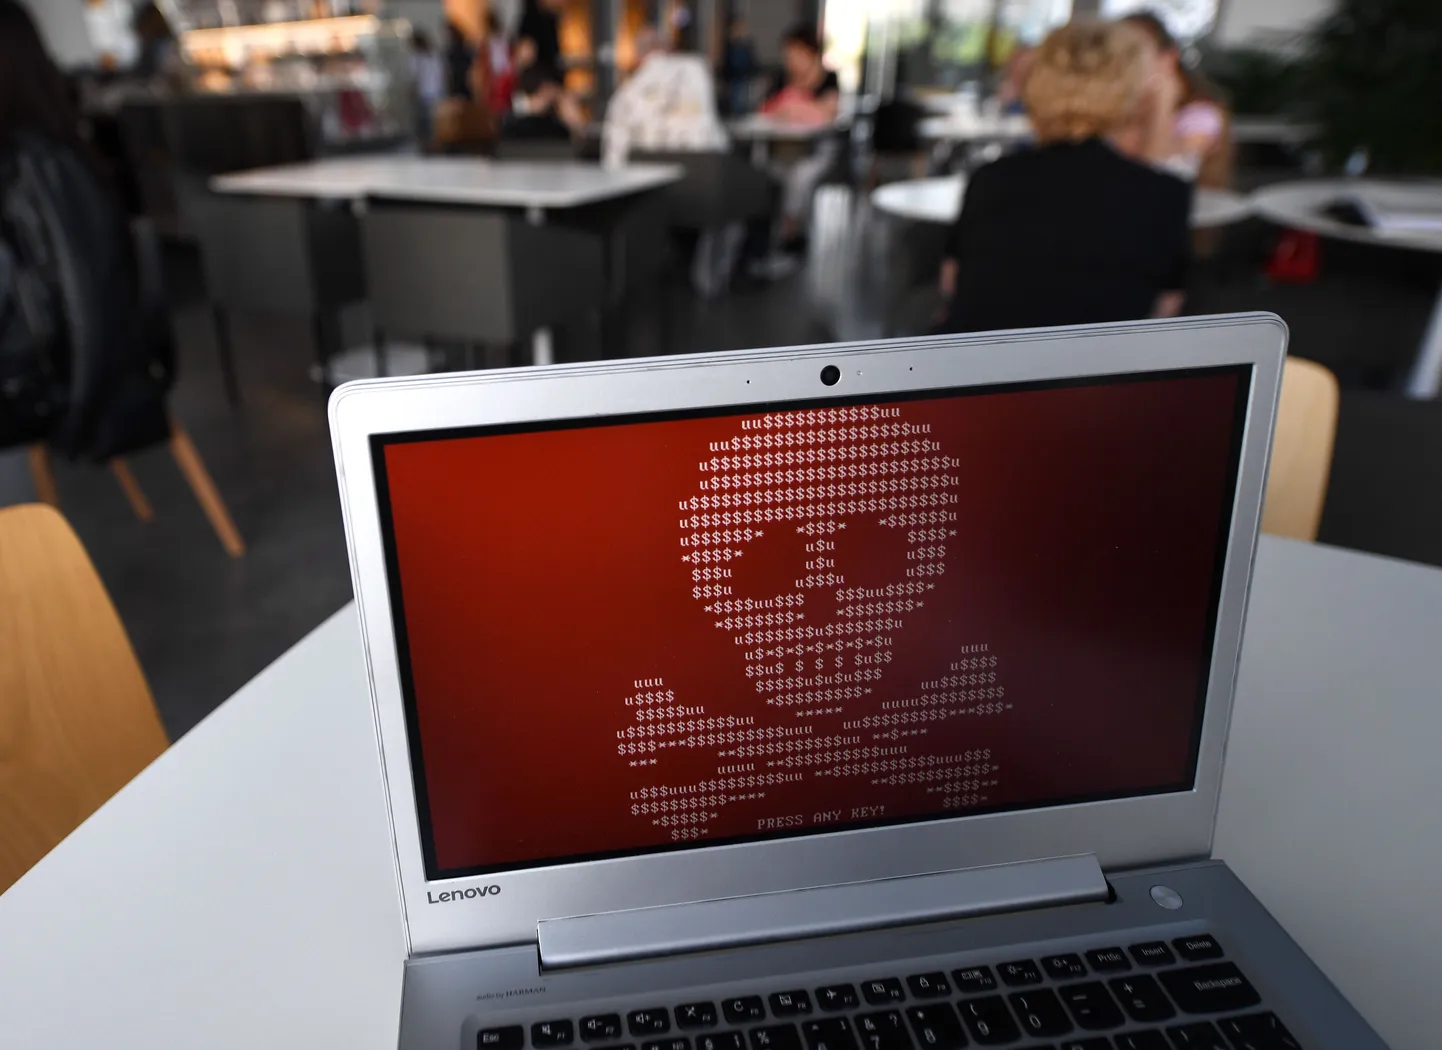 YEKATERINBURG, RUSSIA - JUNE 28, 2017: A computer hacked by a virus known as Petya. The Petya ransomware cyber attack hit computers of Russian and Ukrainian companies on June 27, 2017. Donat Sorokin/TASS